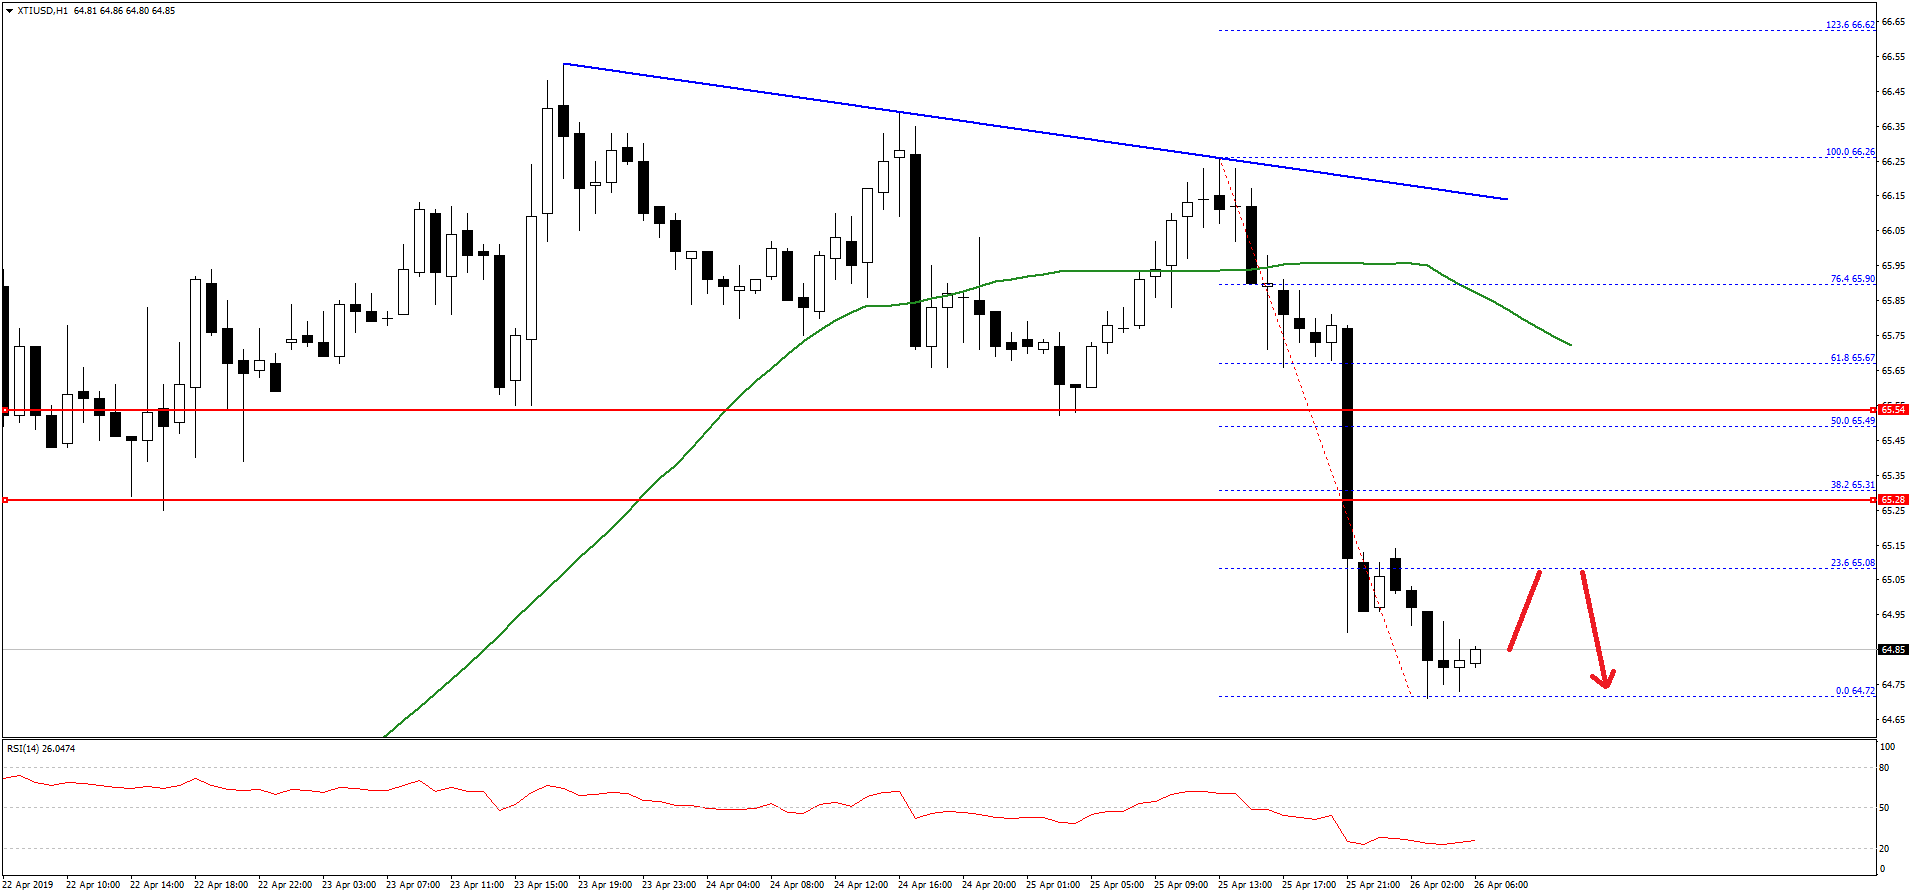 Oil Price Technical Analysis The Xti Usd Pair In A Downside Correction - 